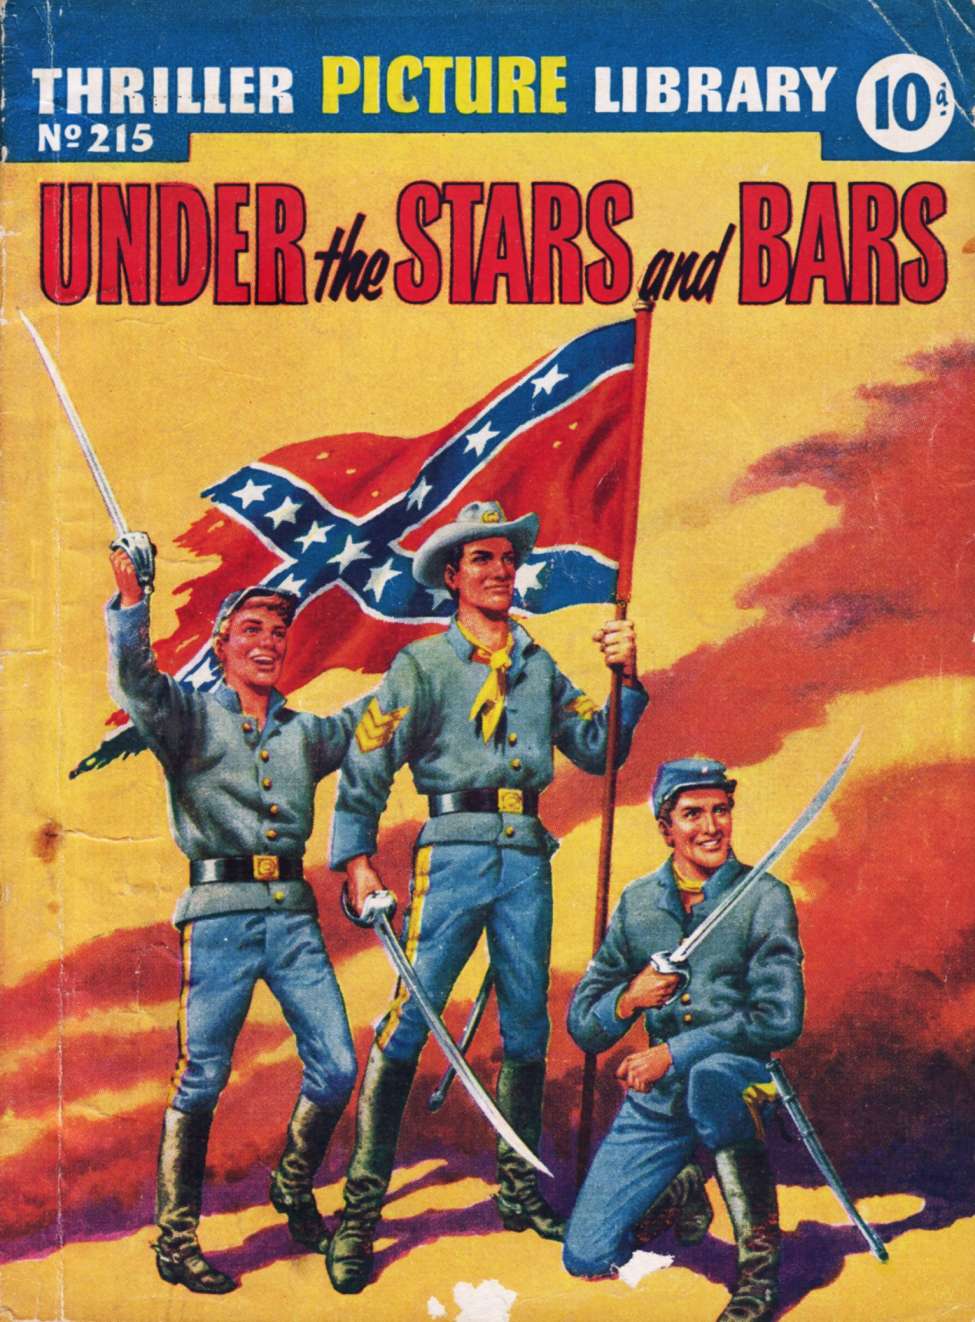 Book Cover For Thriller Picture Library 215 - Under the Stars and Bars